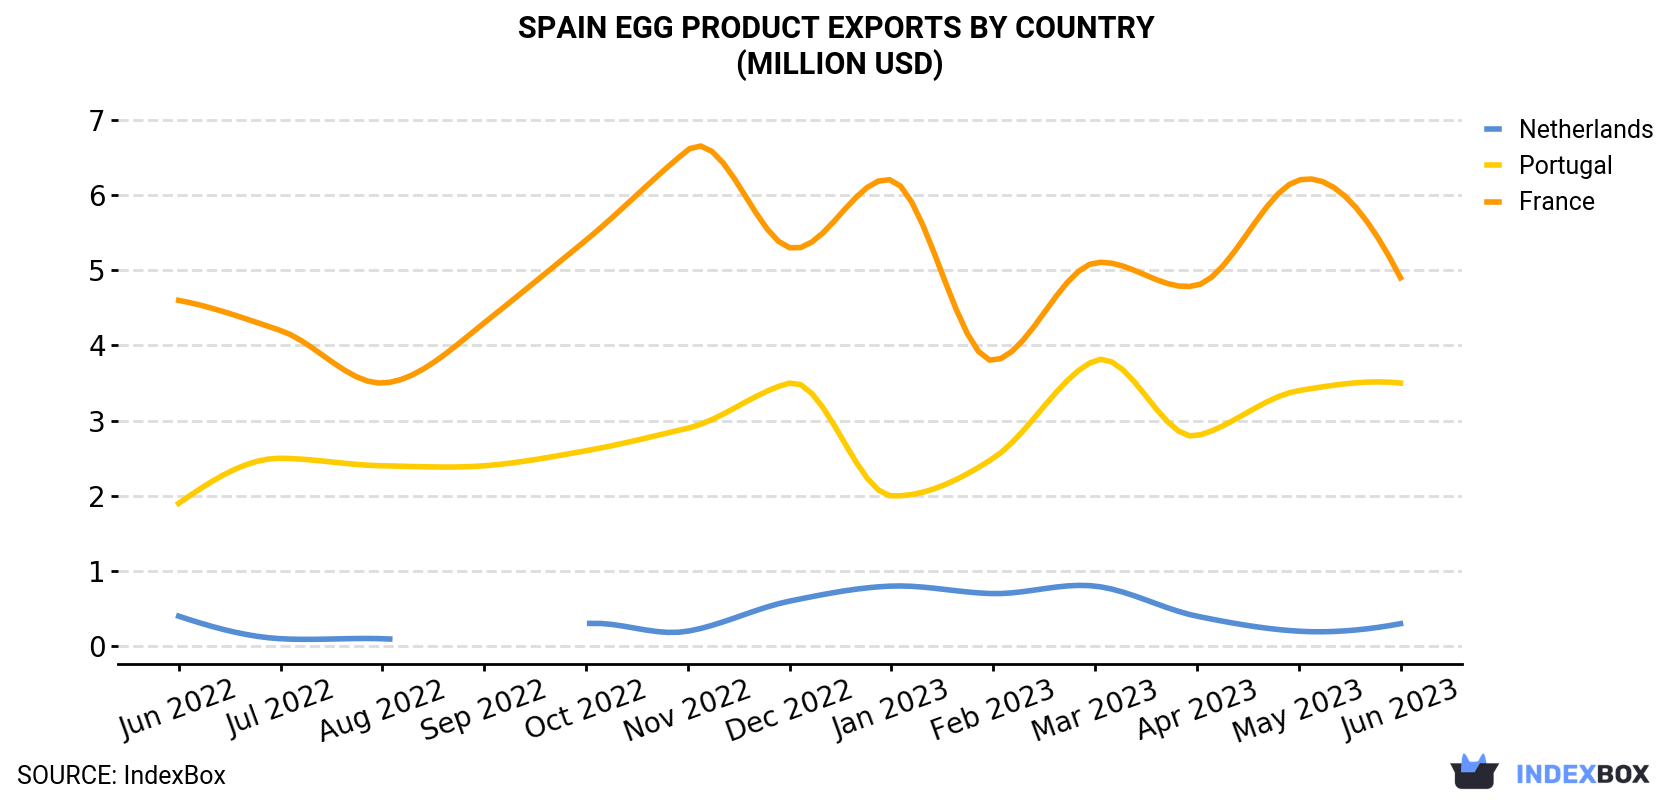 Spain Egg Product Exports By Country (Million USD)